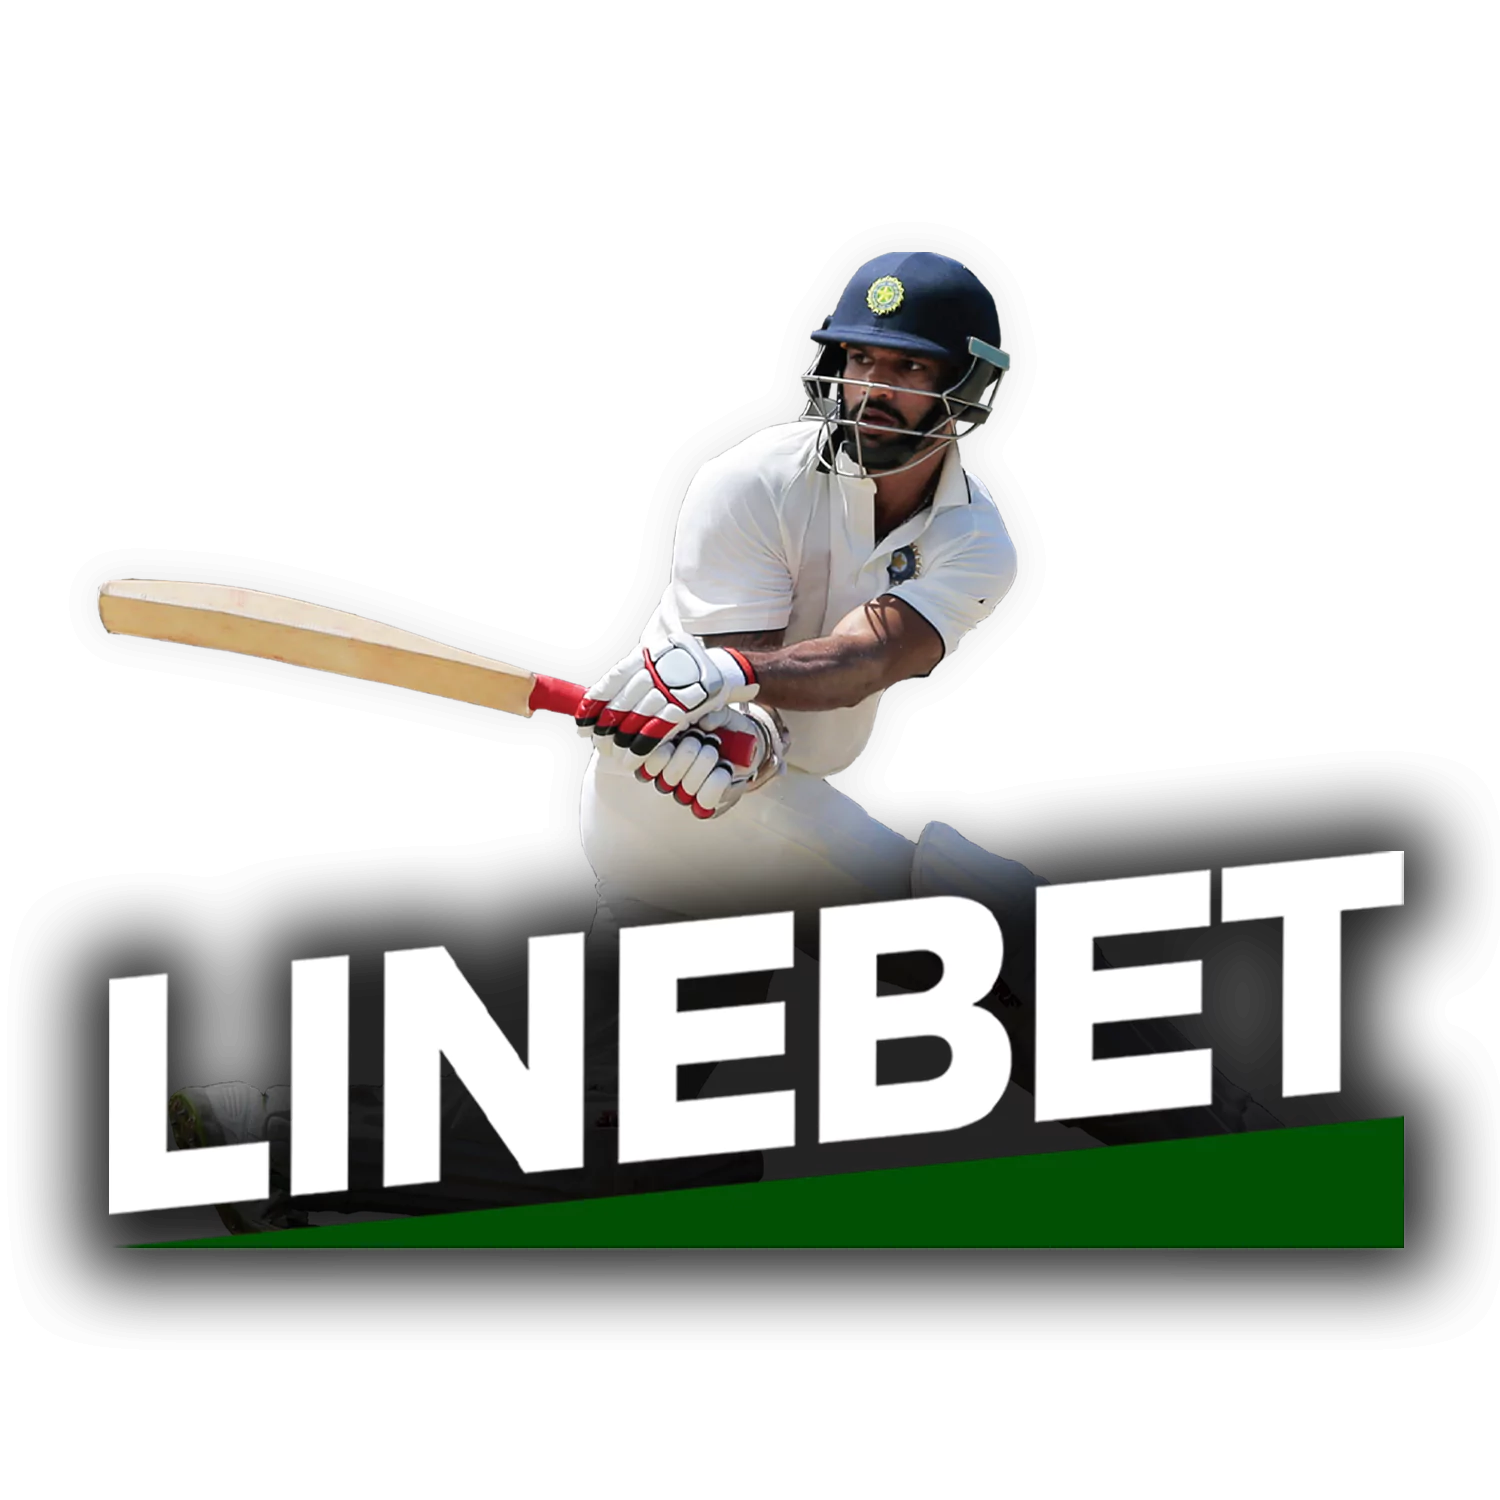 Linebet offers sports betting and online casino in Kenya.